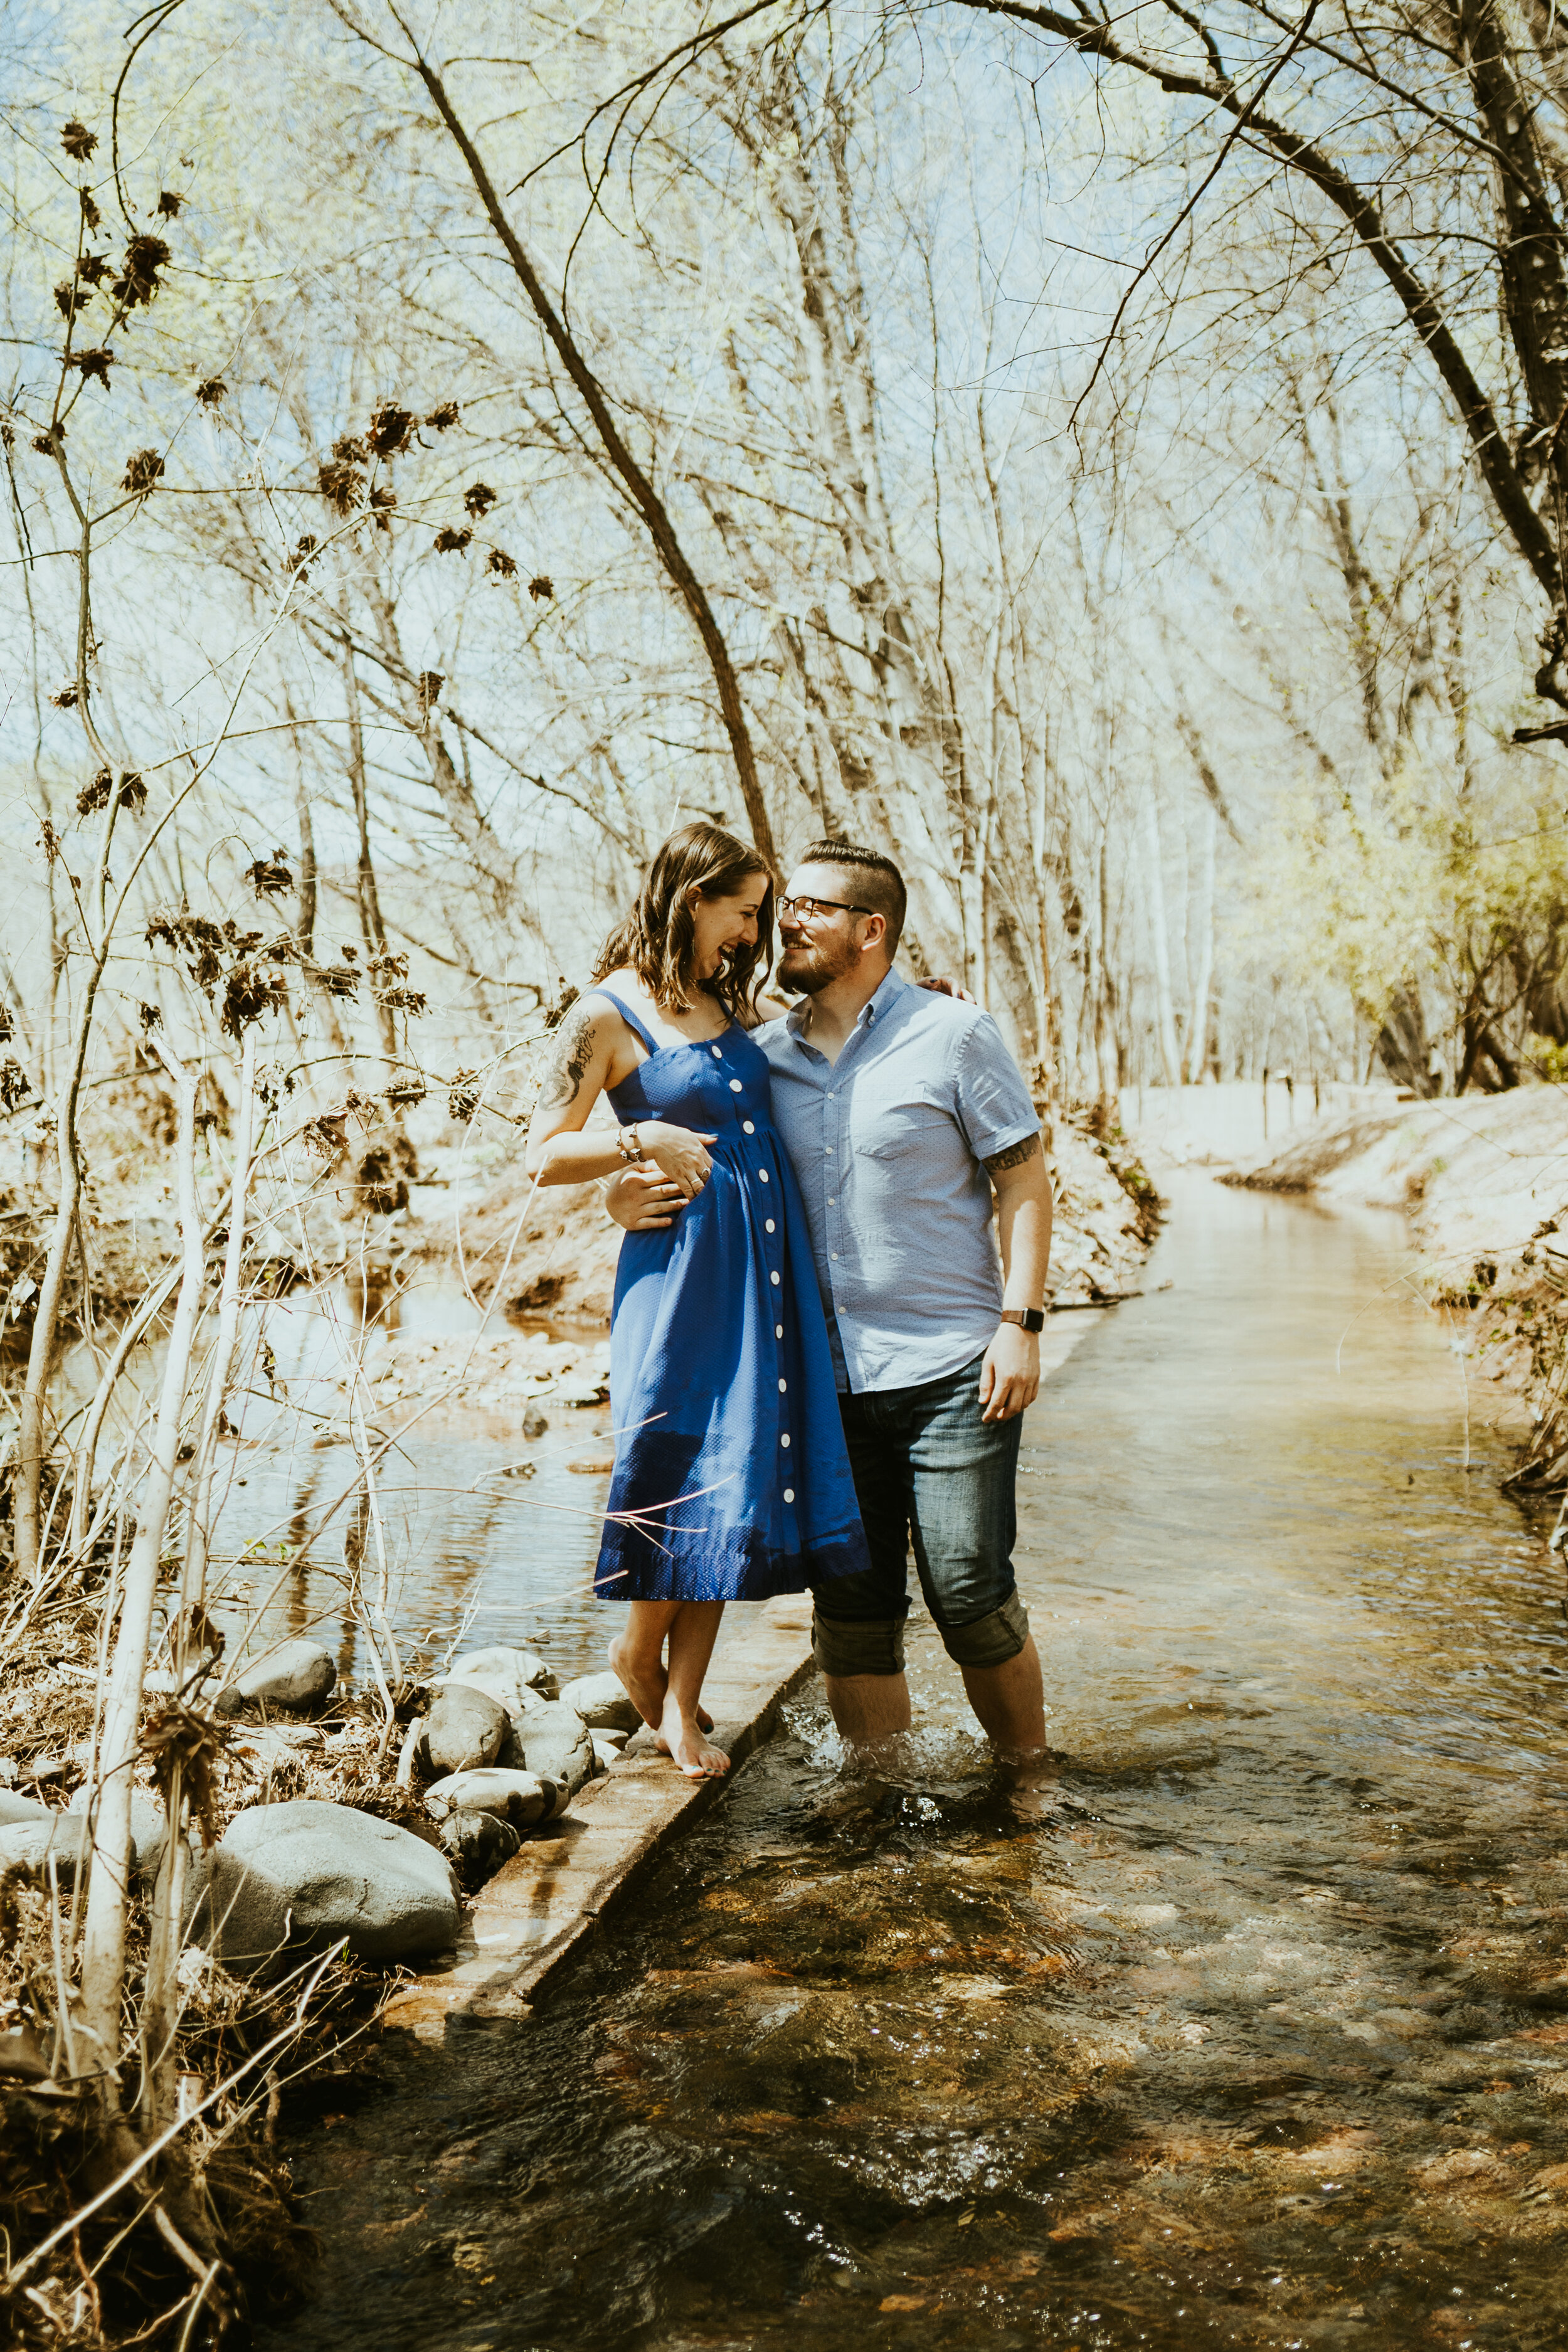 red rock crossing sedona arizona cathedral rock crescent moon ranch couple photos engagement photo outfit inspiration couple posing ideas midday photos-34.jpg